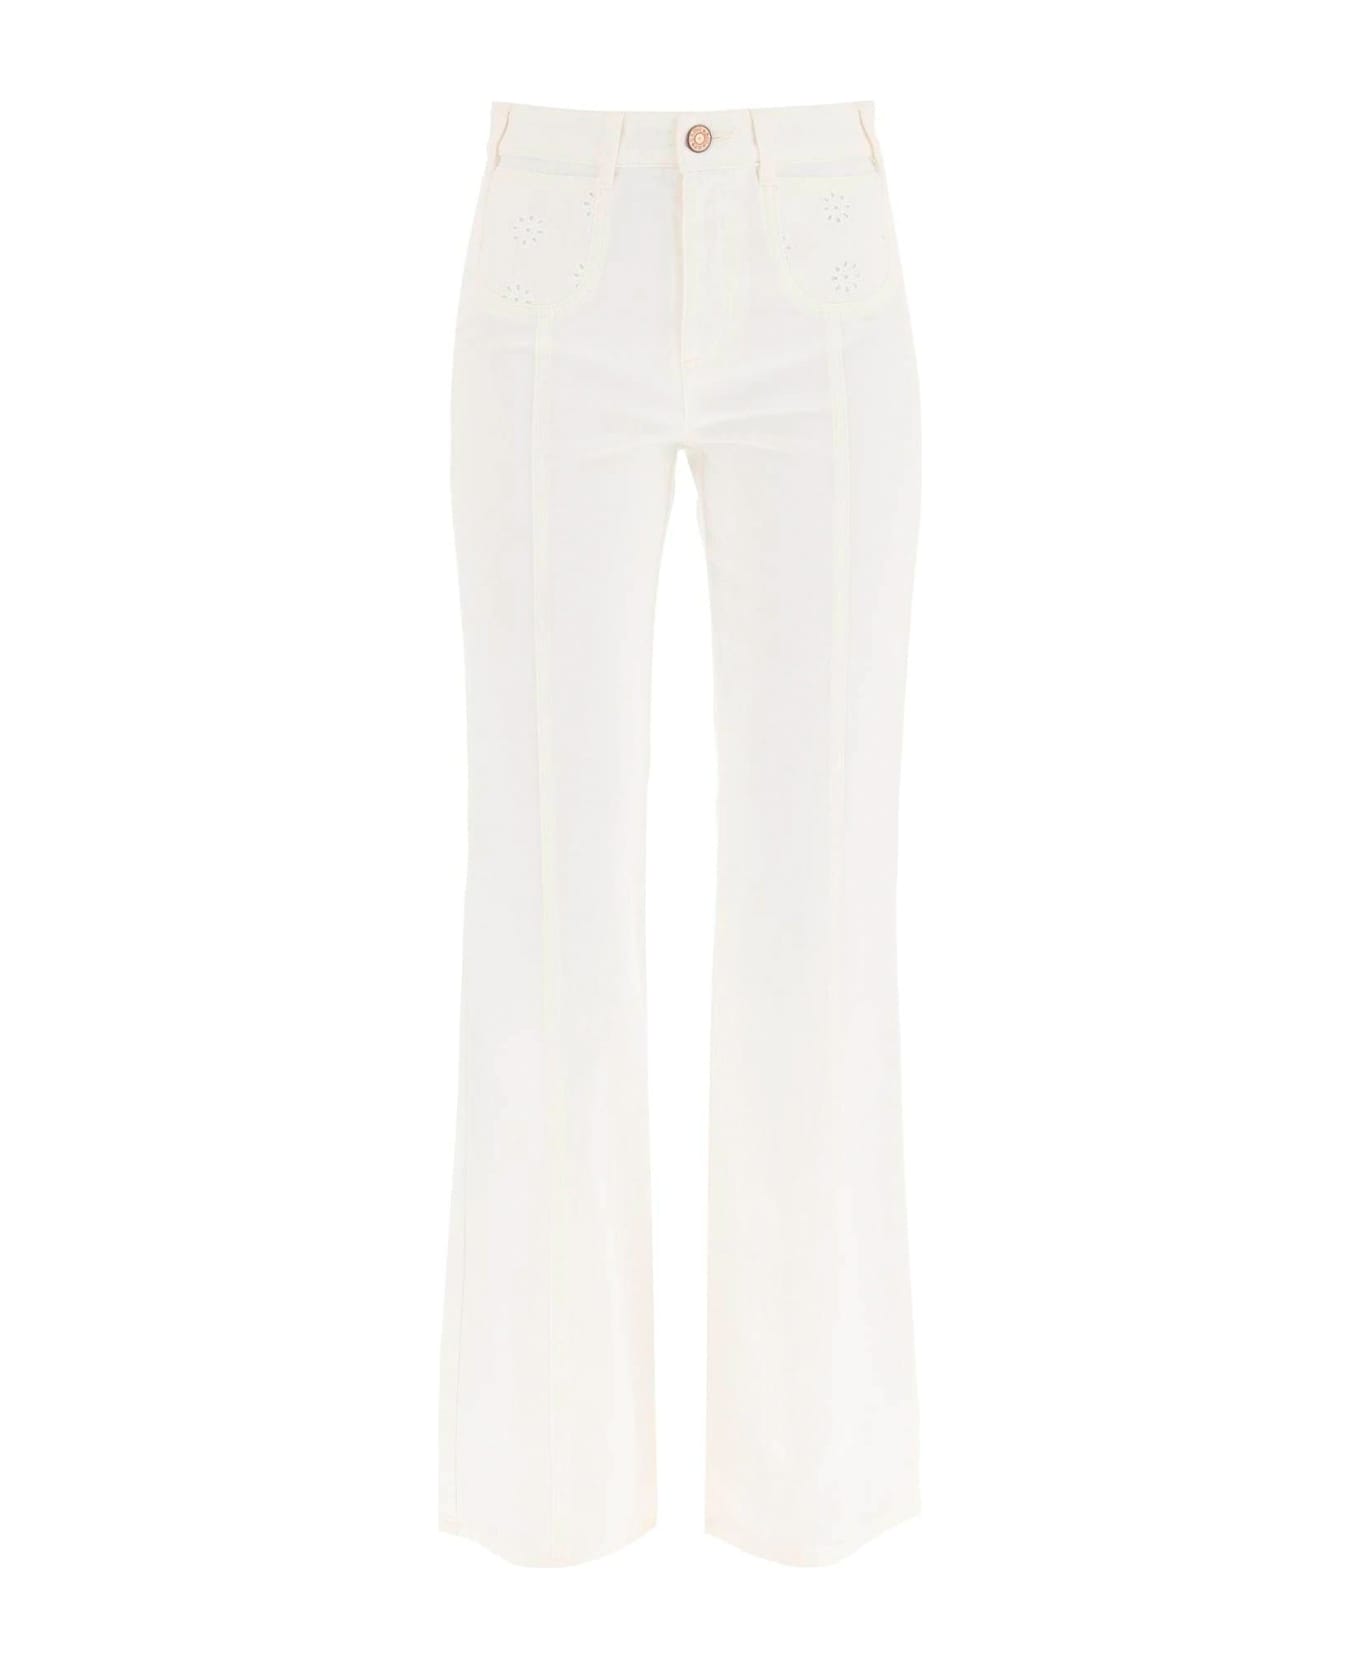 See by Chloé Denim Jeans - White ボトムス